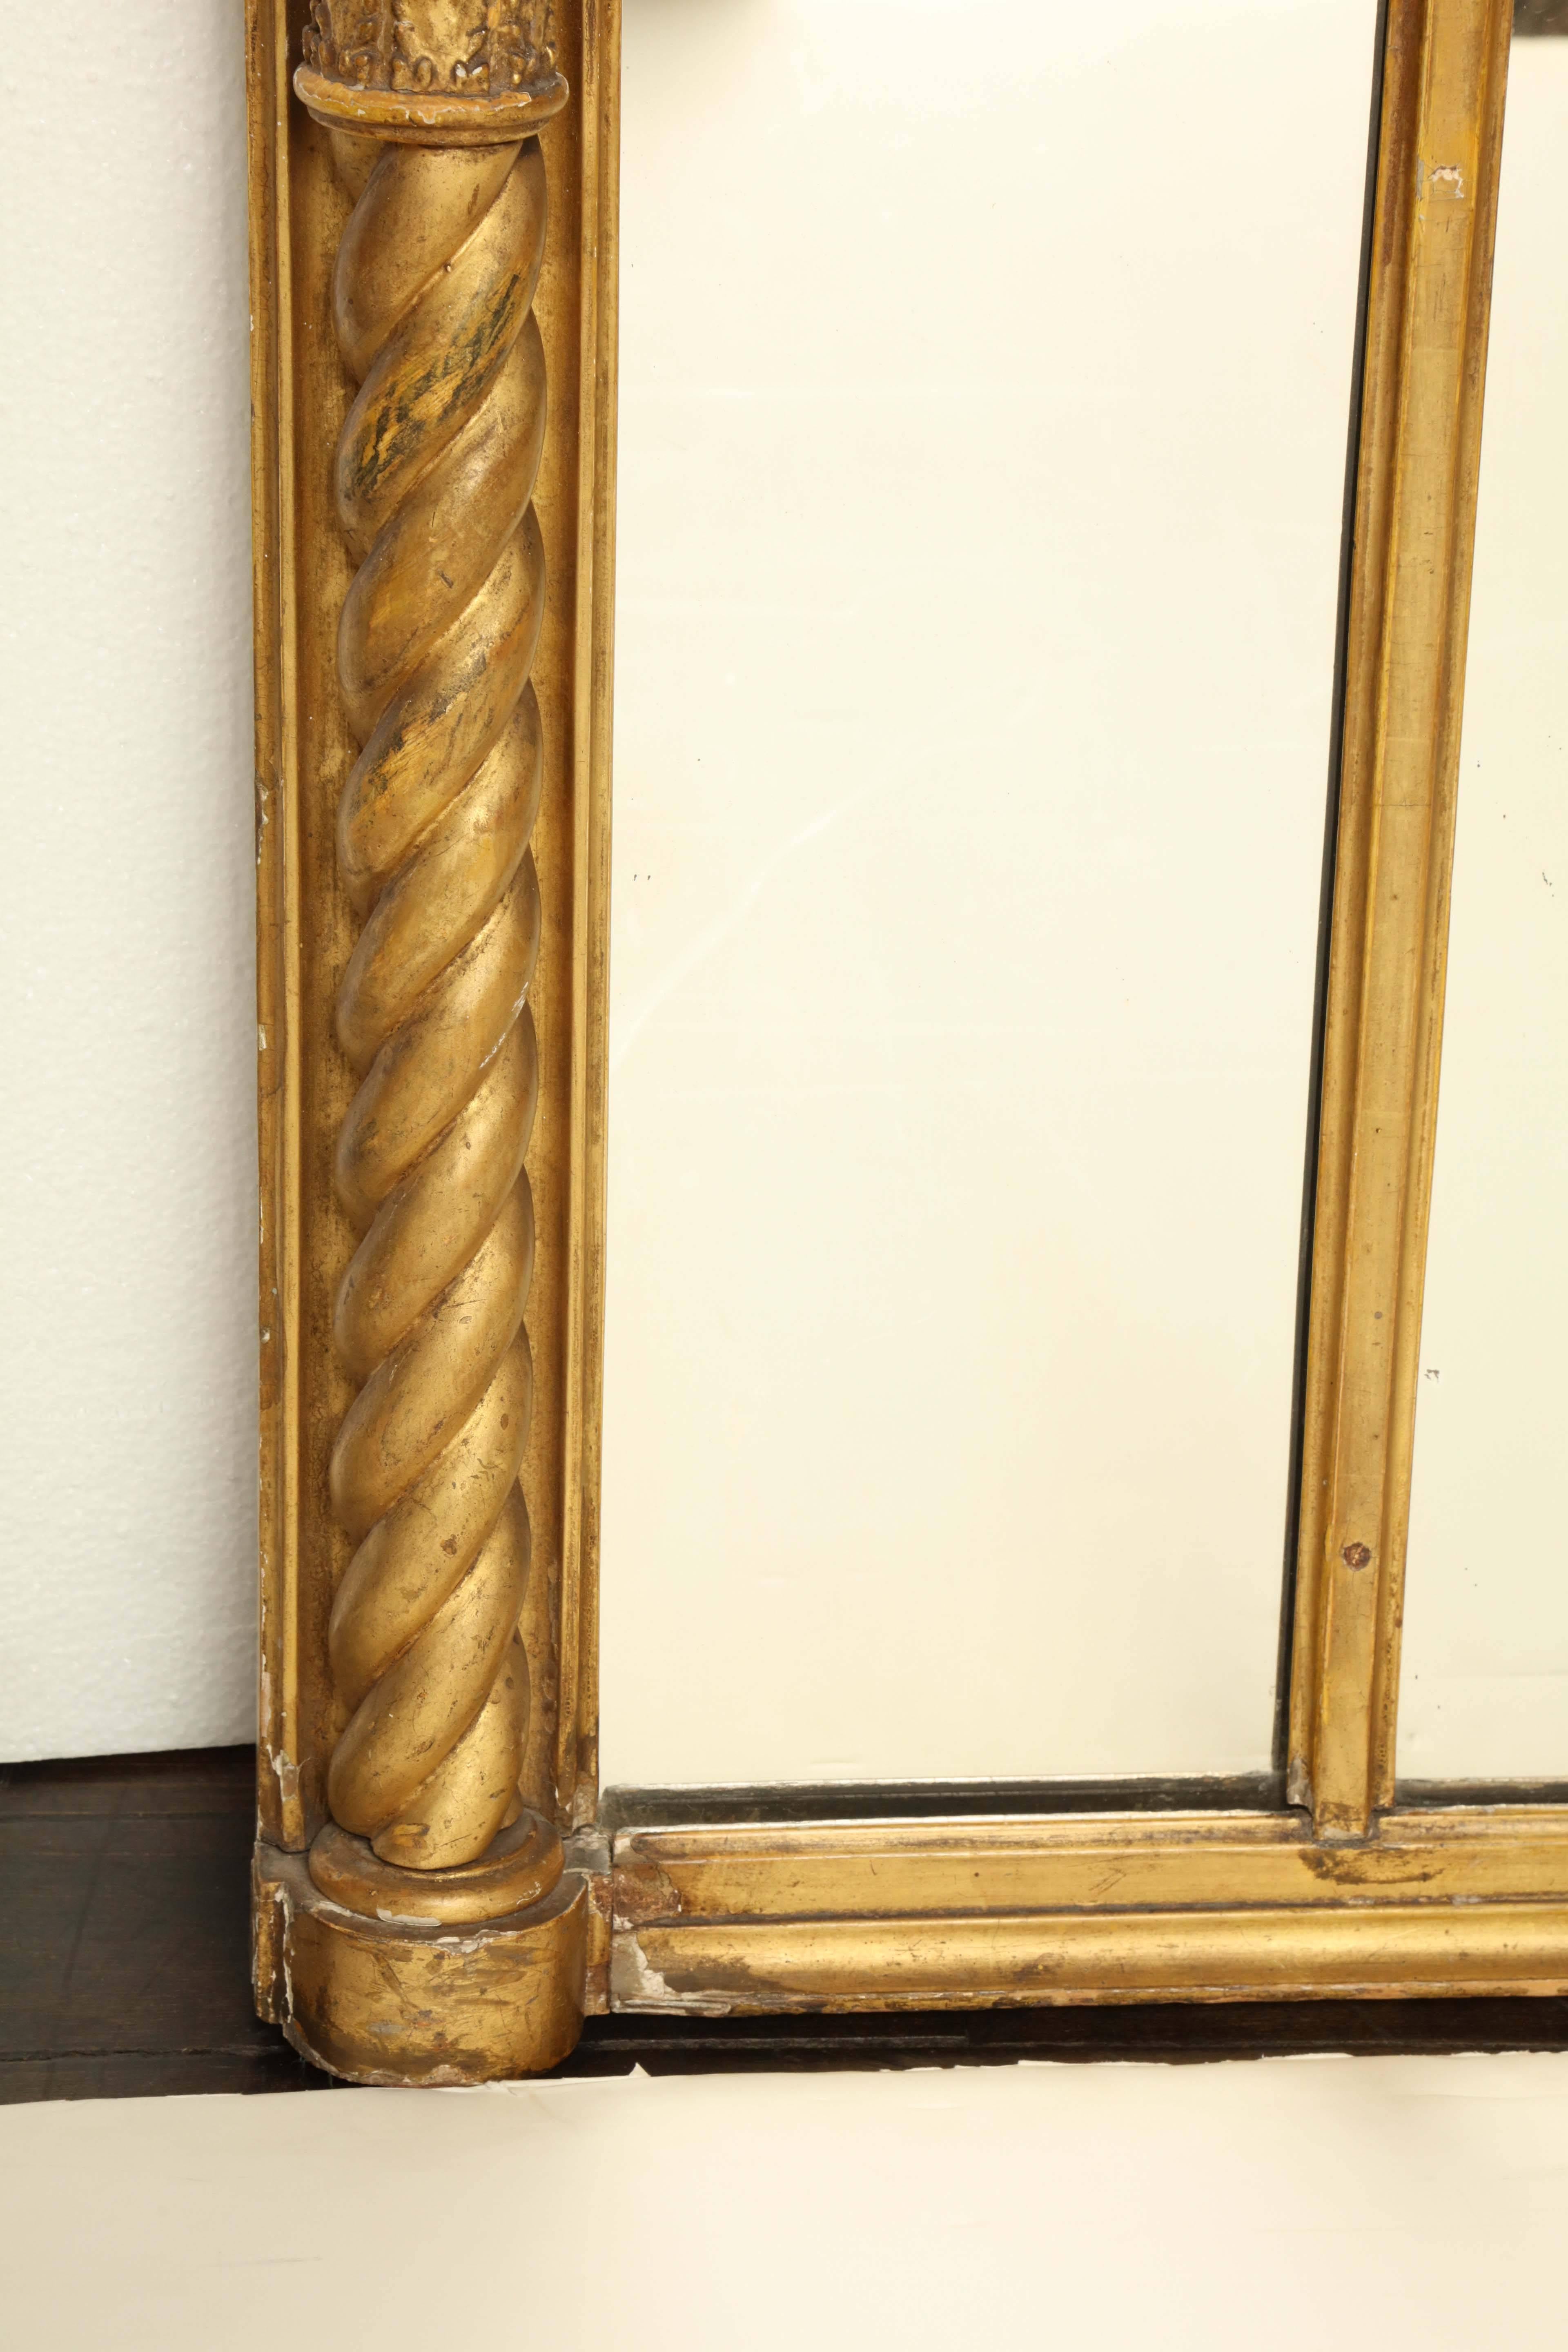 Early 19th Century English Regency, Neoclassical Giltwood Mirror For Sale 1